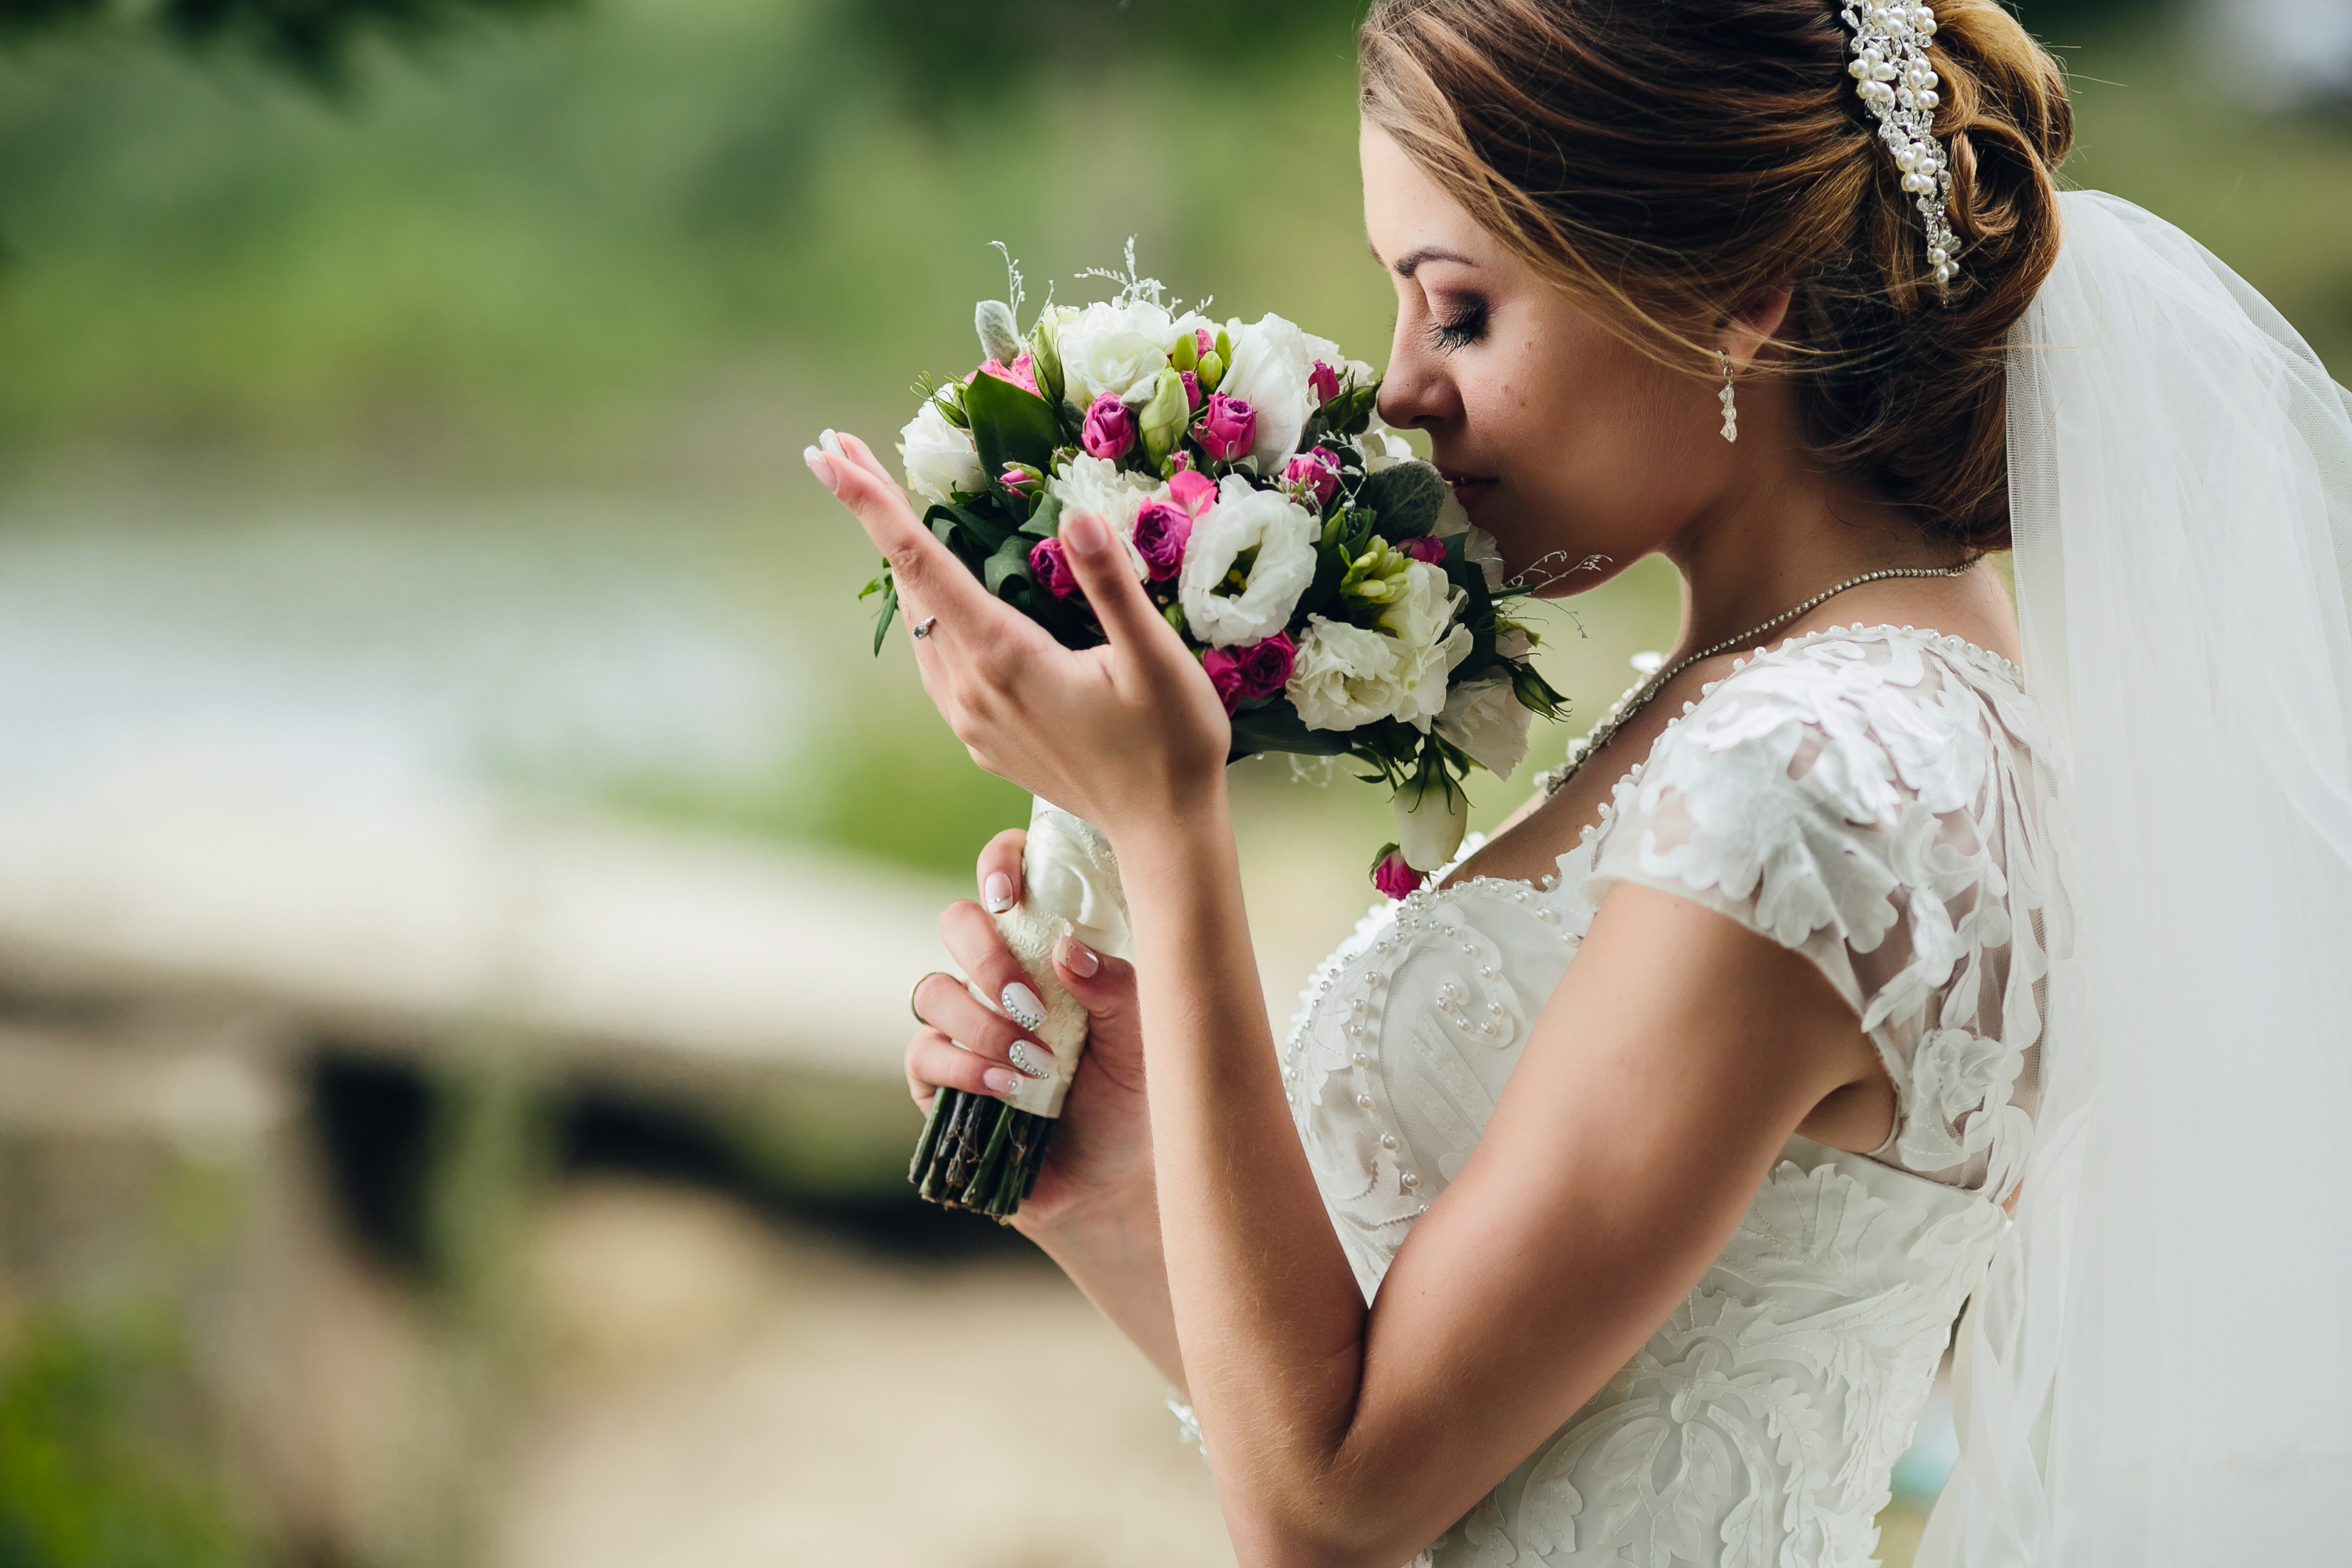 10 Biggest Mistakes Couples Make When Planning a Wedding